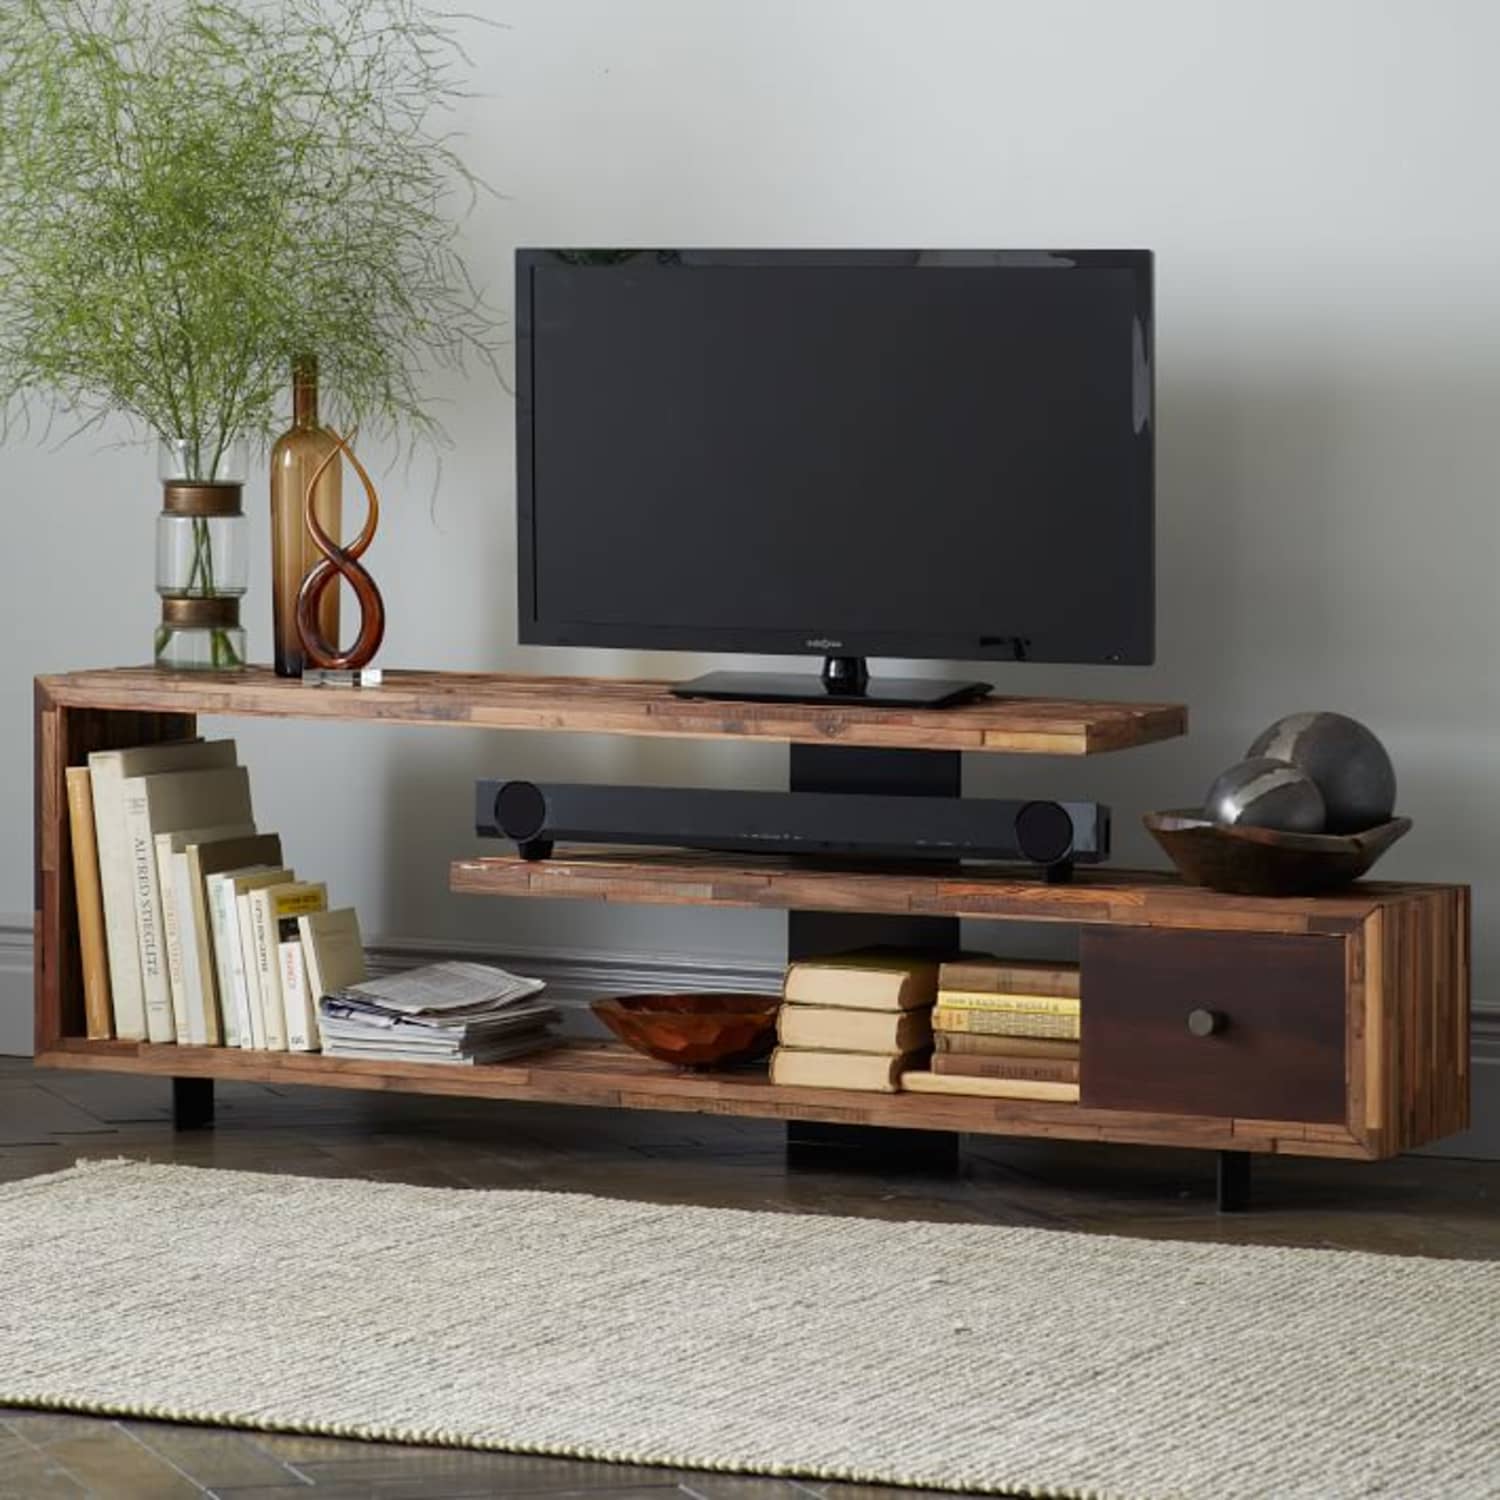 10 Best TV Consoles and Stands 2019